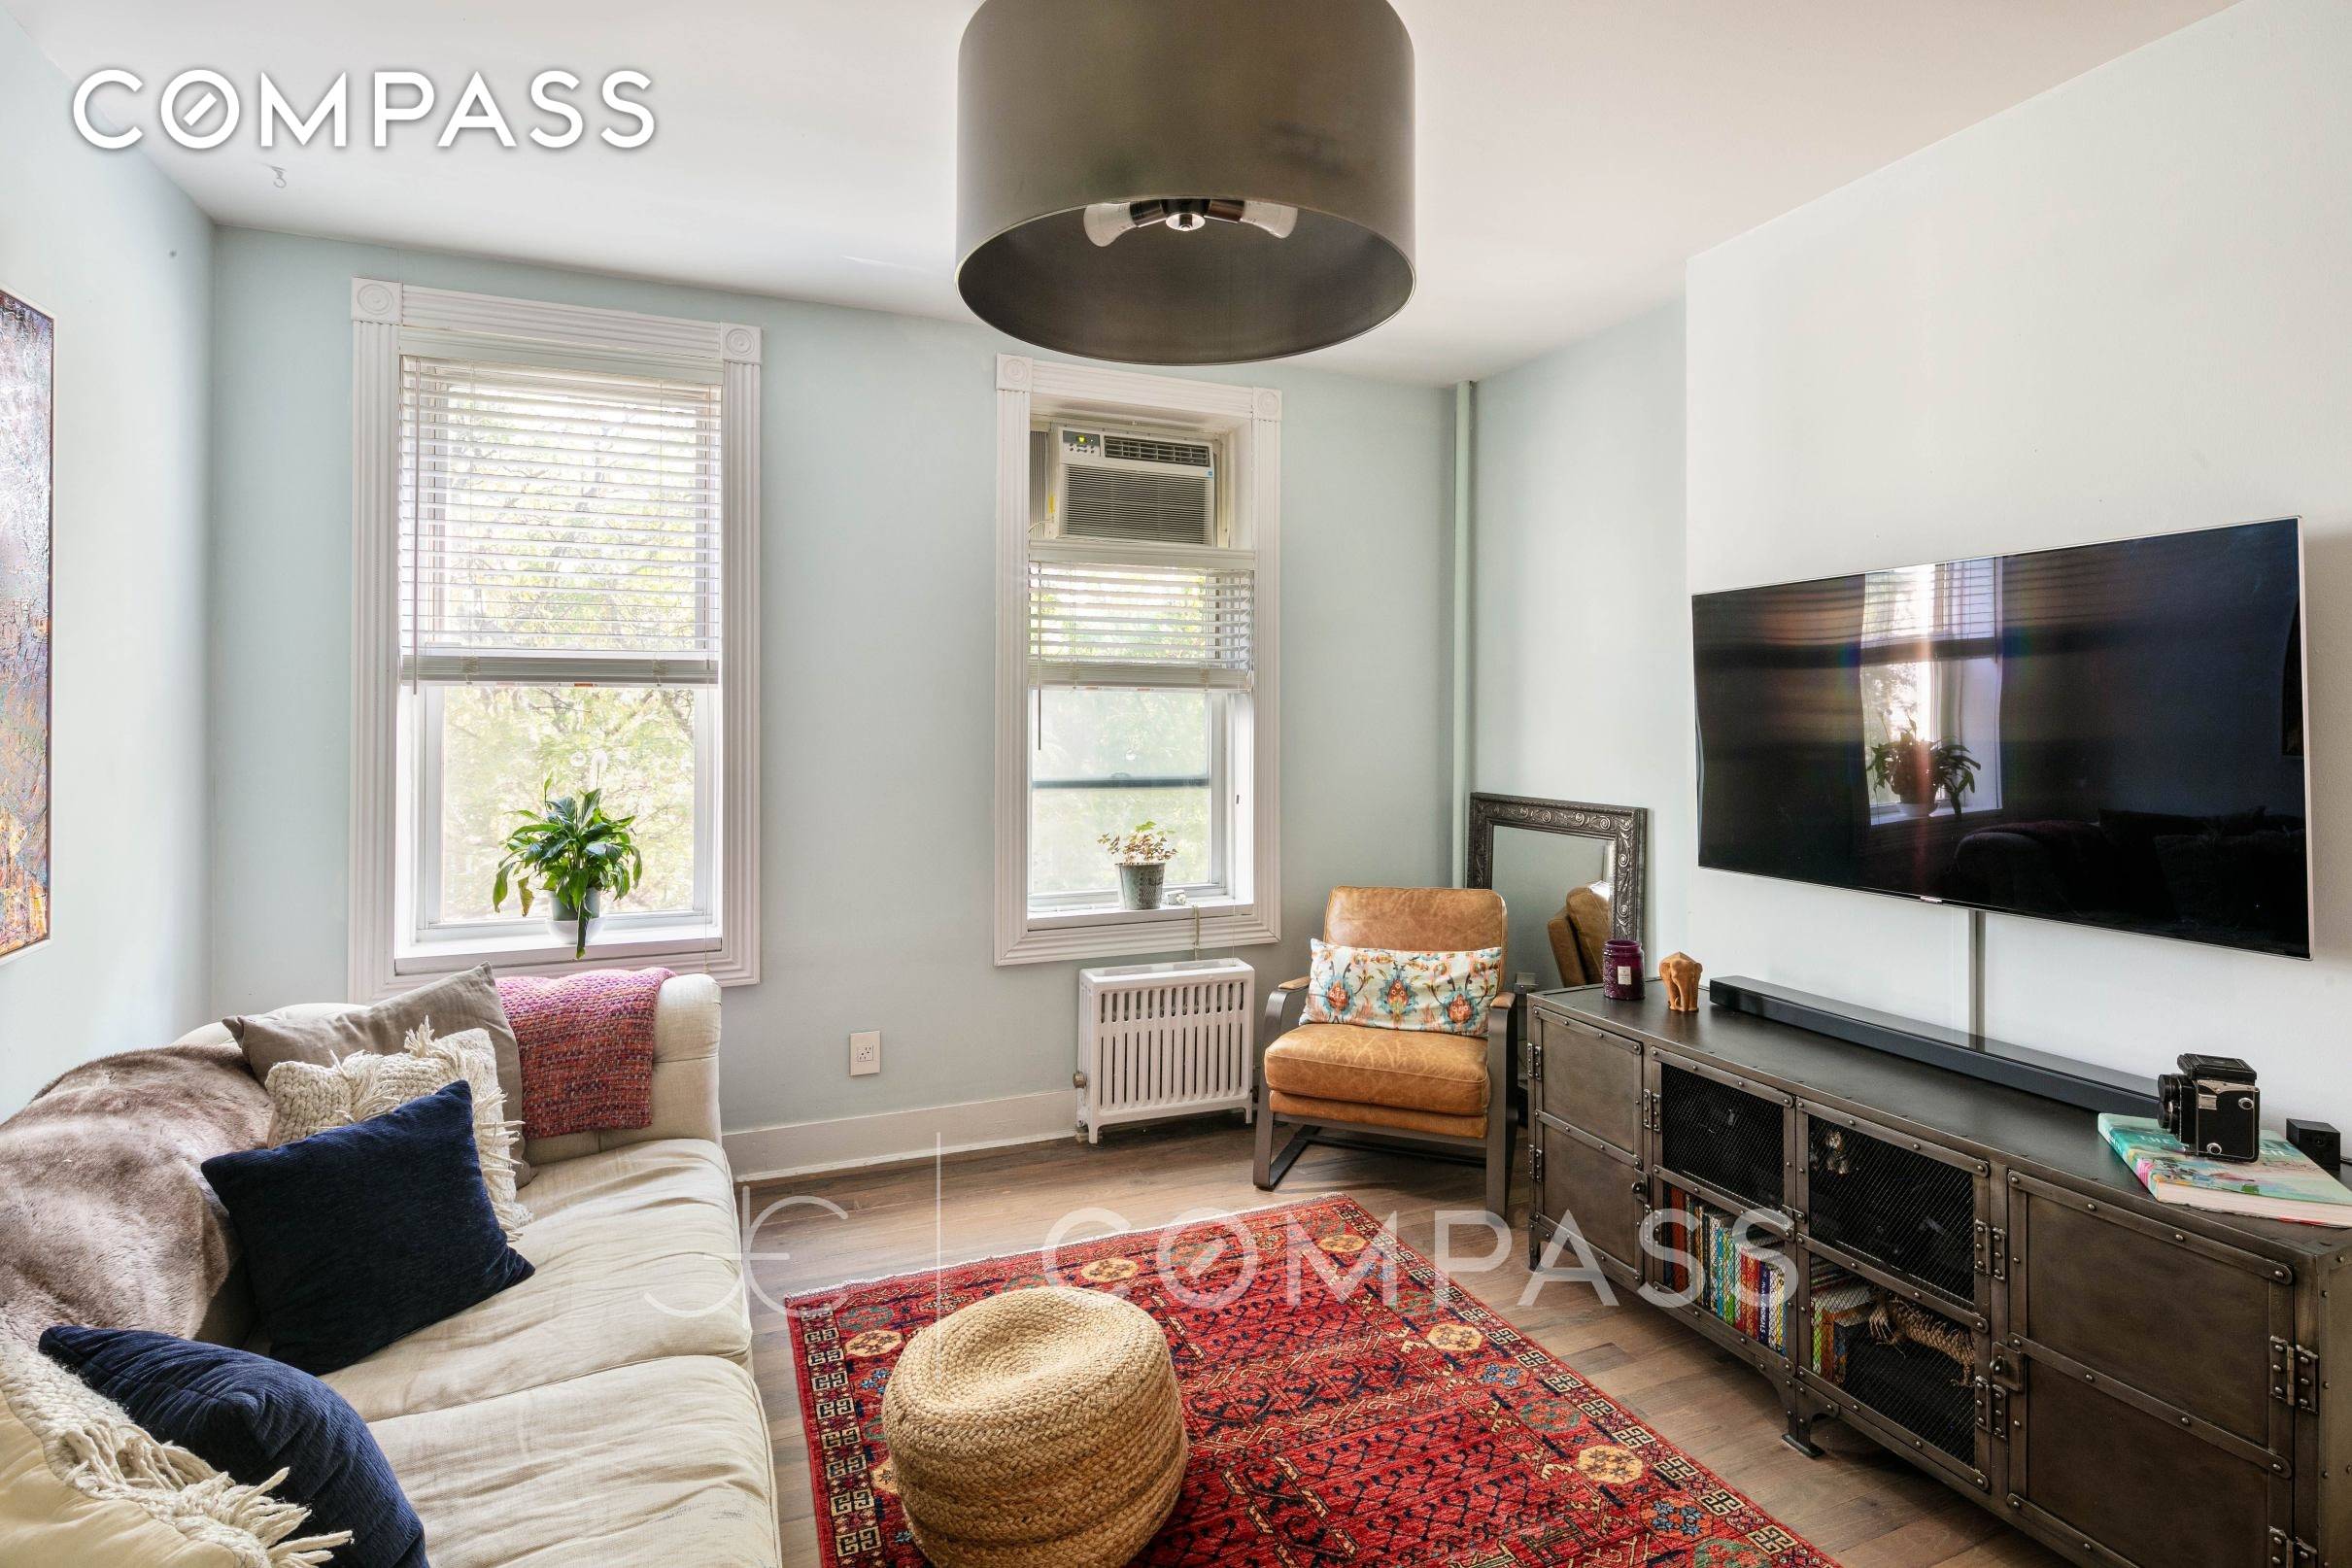 Stunning two bedroom prewar coop apartment in prime Windsor Terrace South Slope near Prospect Park and Bartel Pritchard Square.